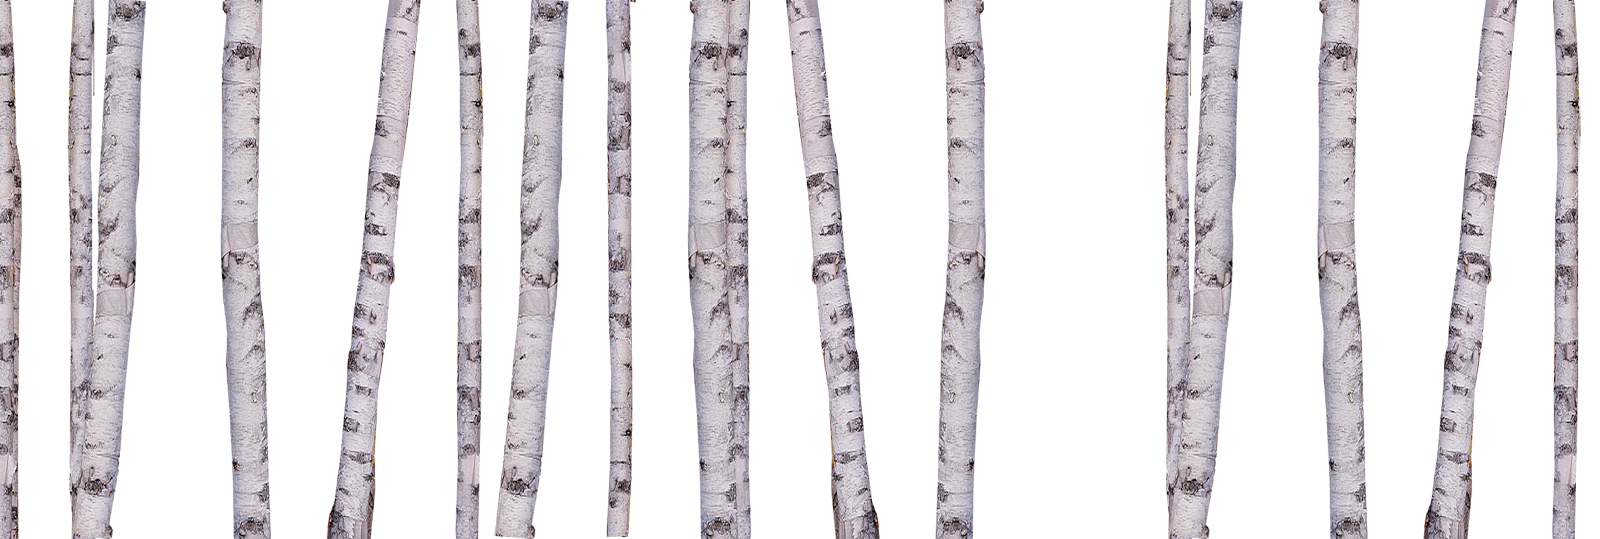 MULTIPLE BIRCH.png